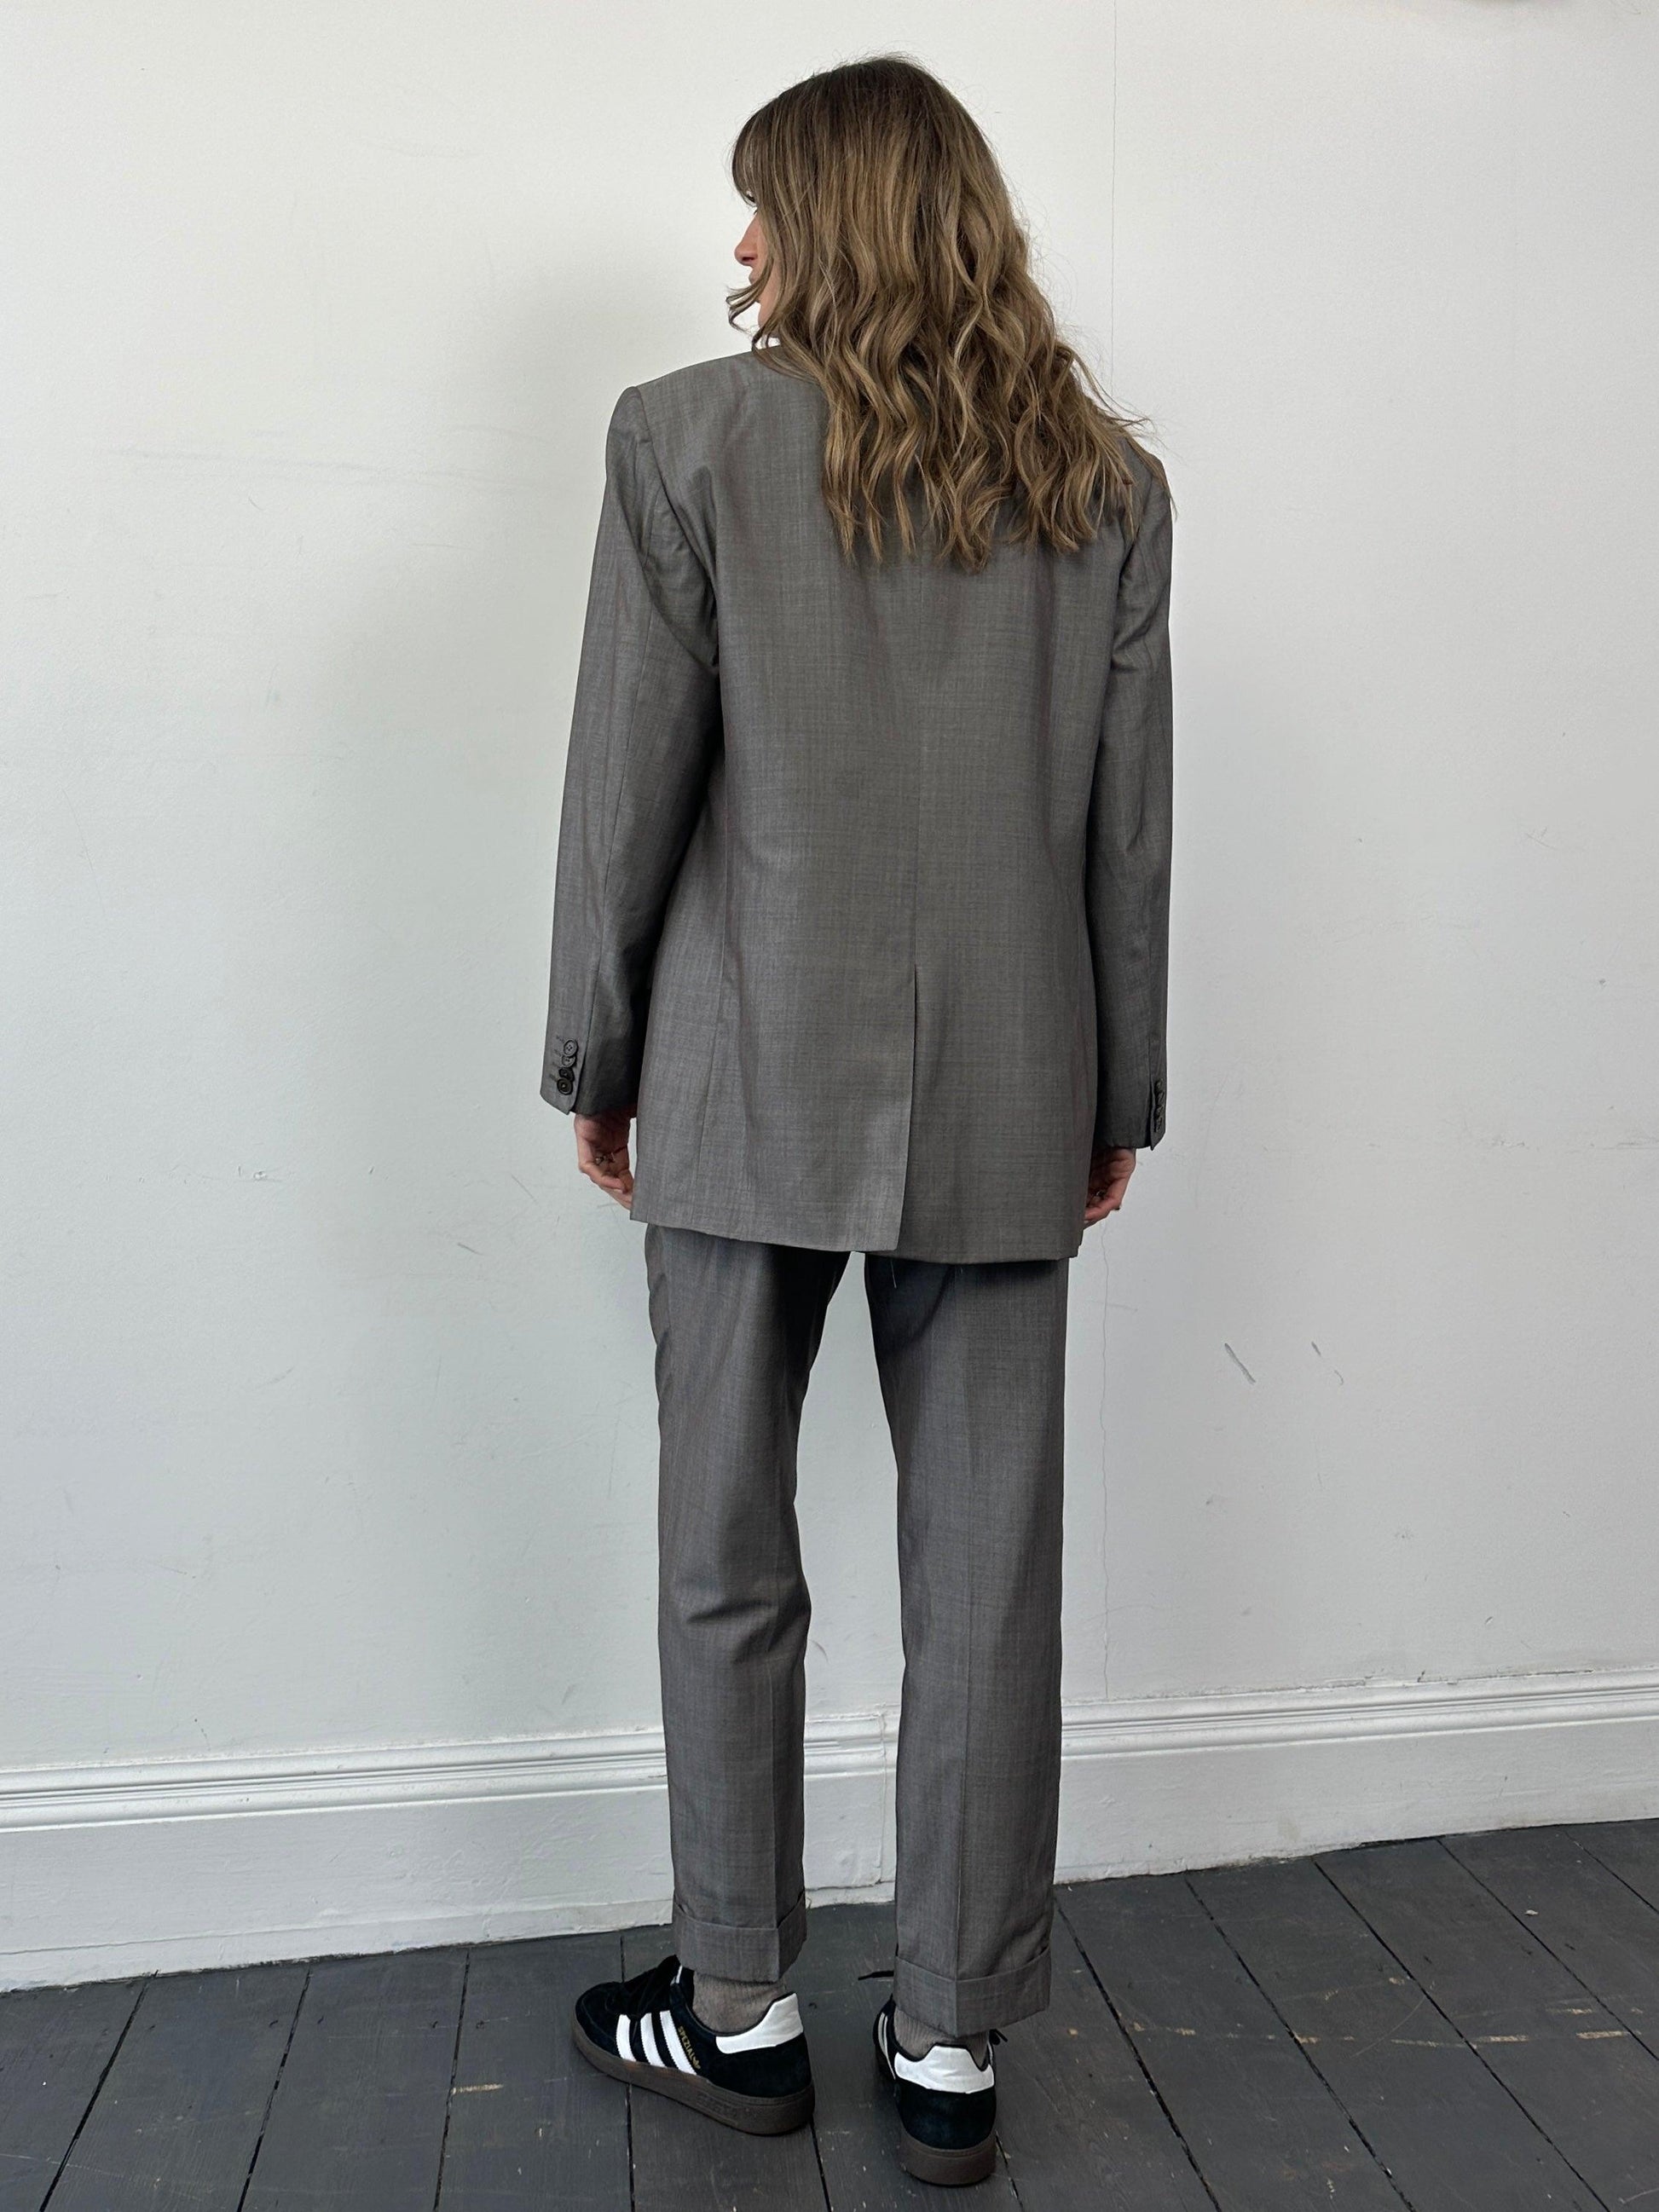 Valentino Virgin Wool Silk Single Breasted Suit - 42R/W32 - Known Source